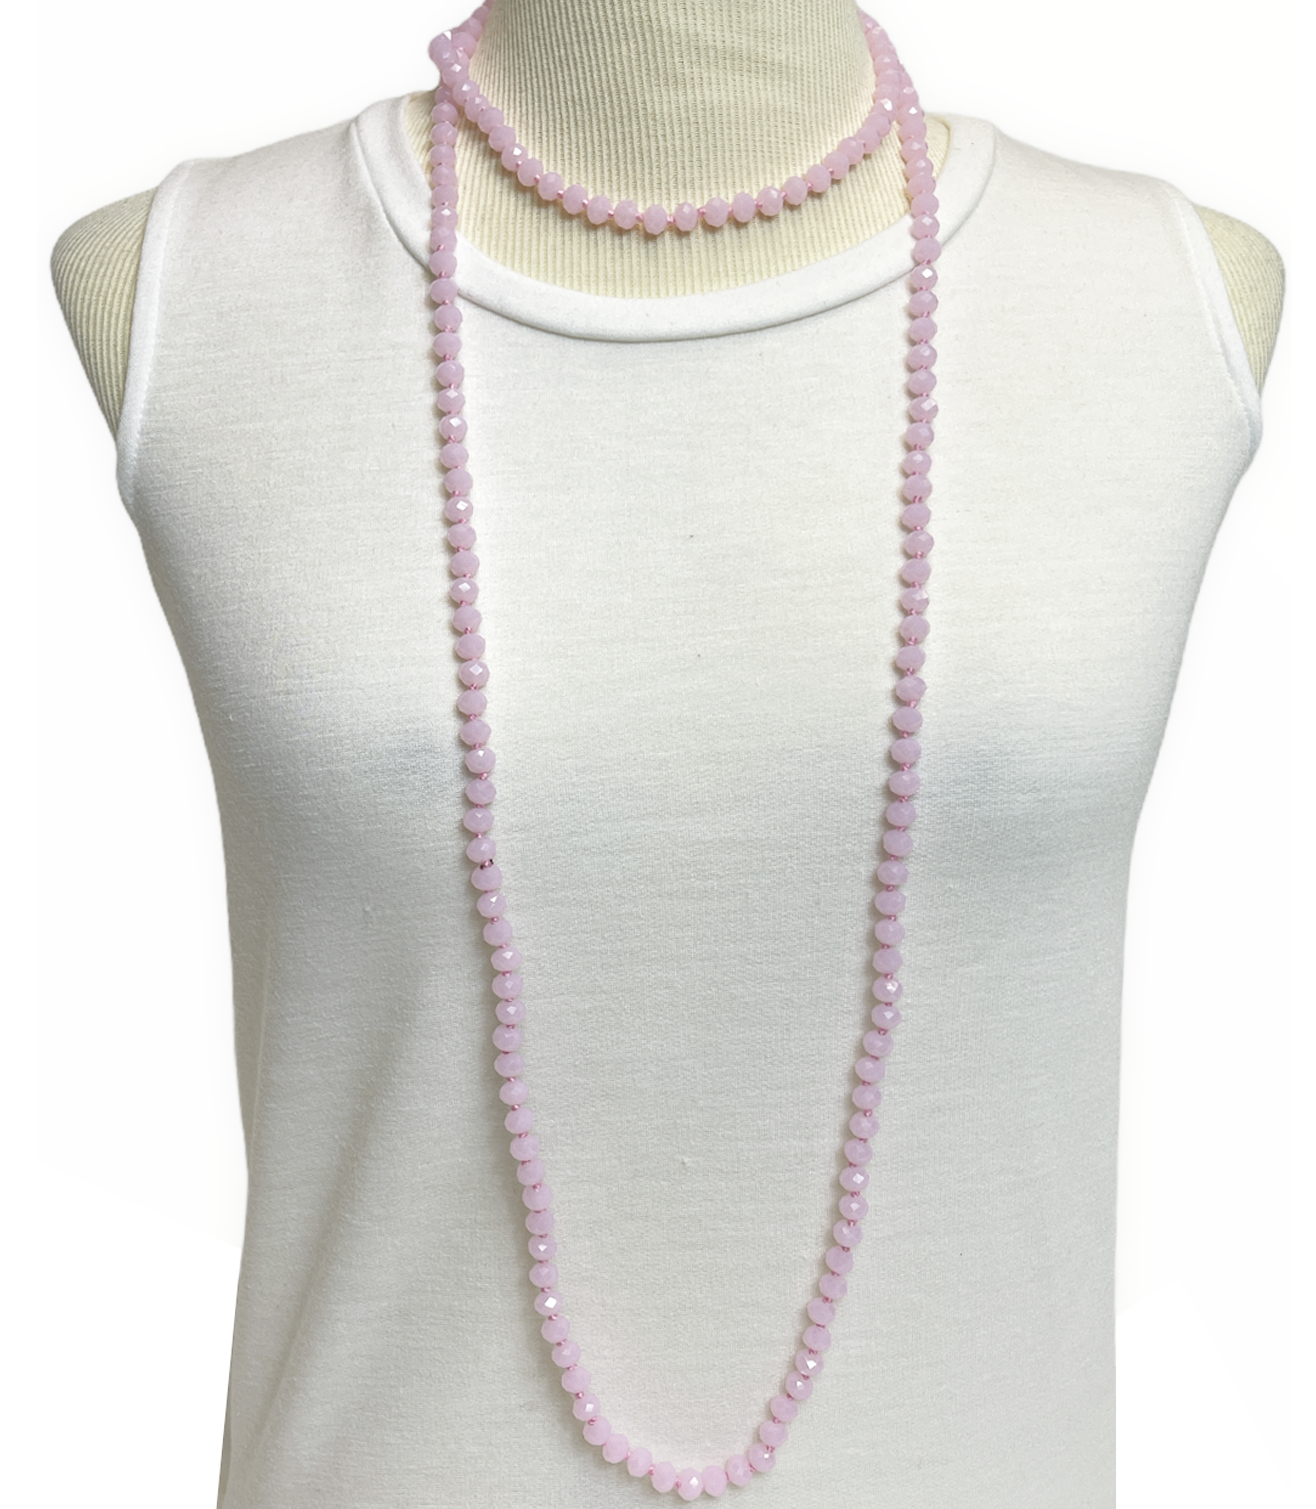 NK-2244 LIGHT PINK 60 hand knotted glass bead necklace